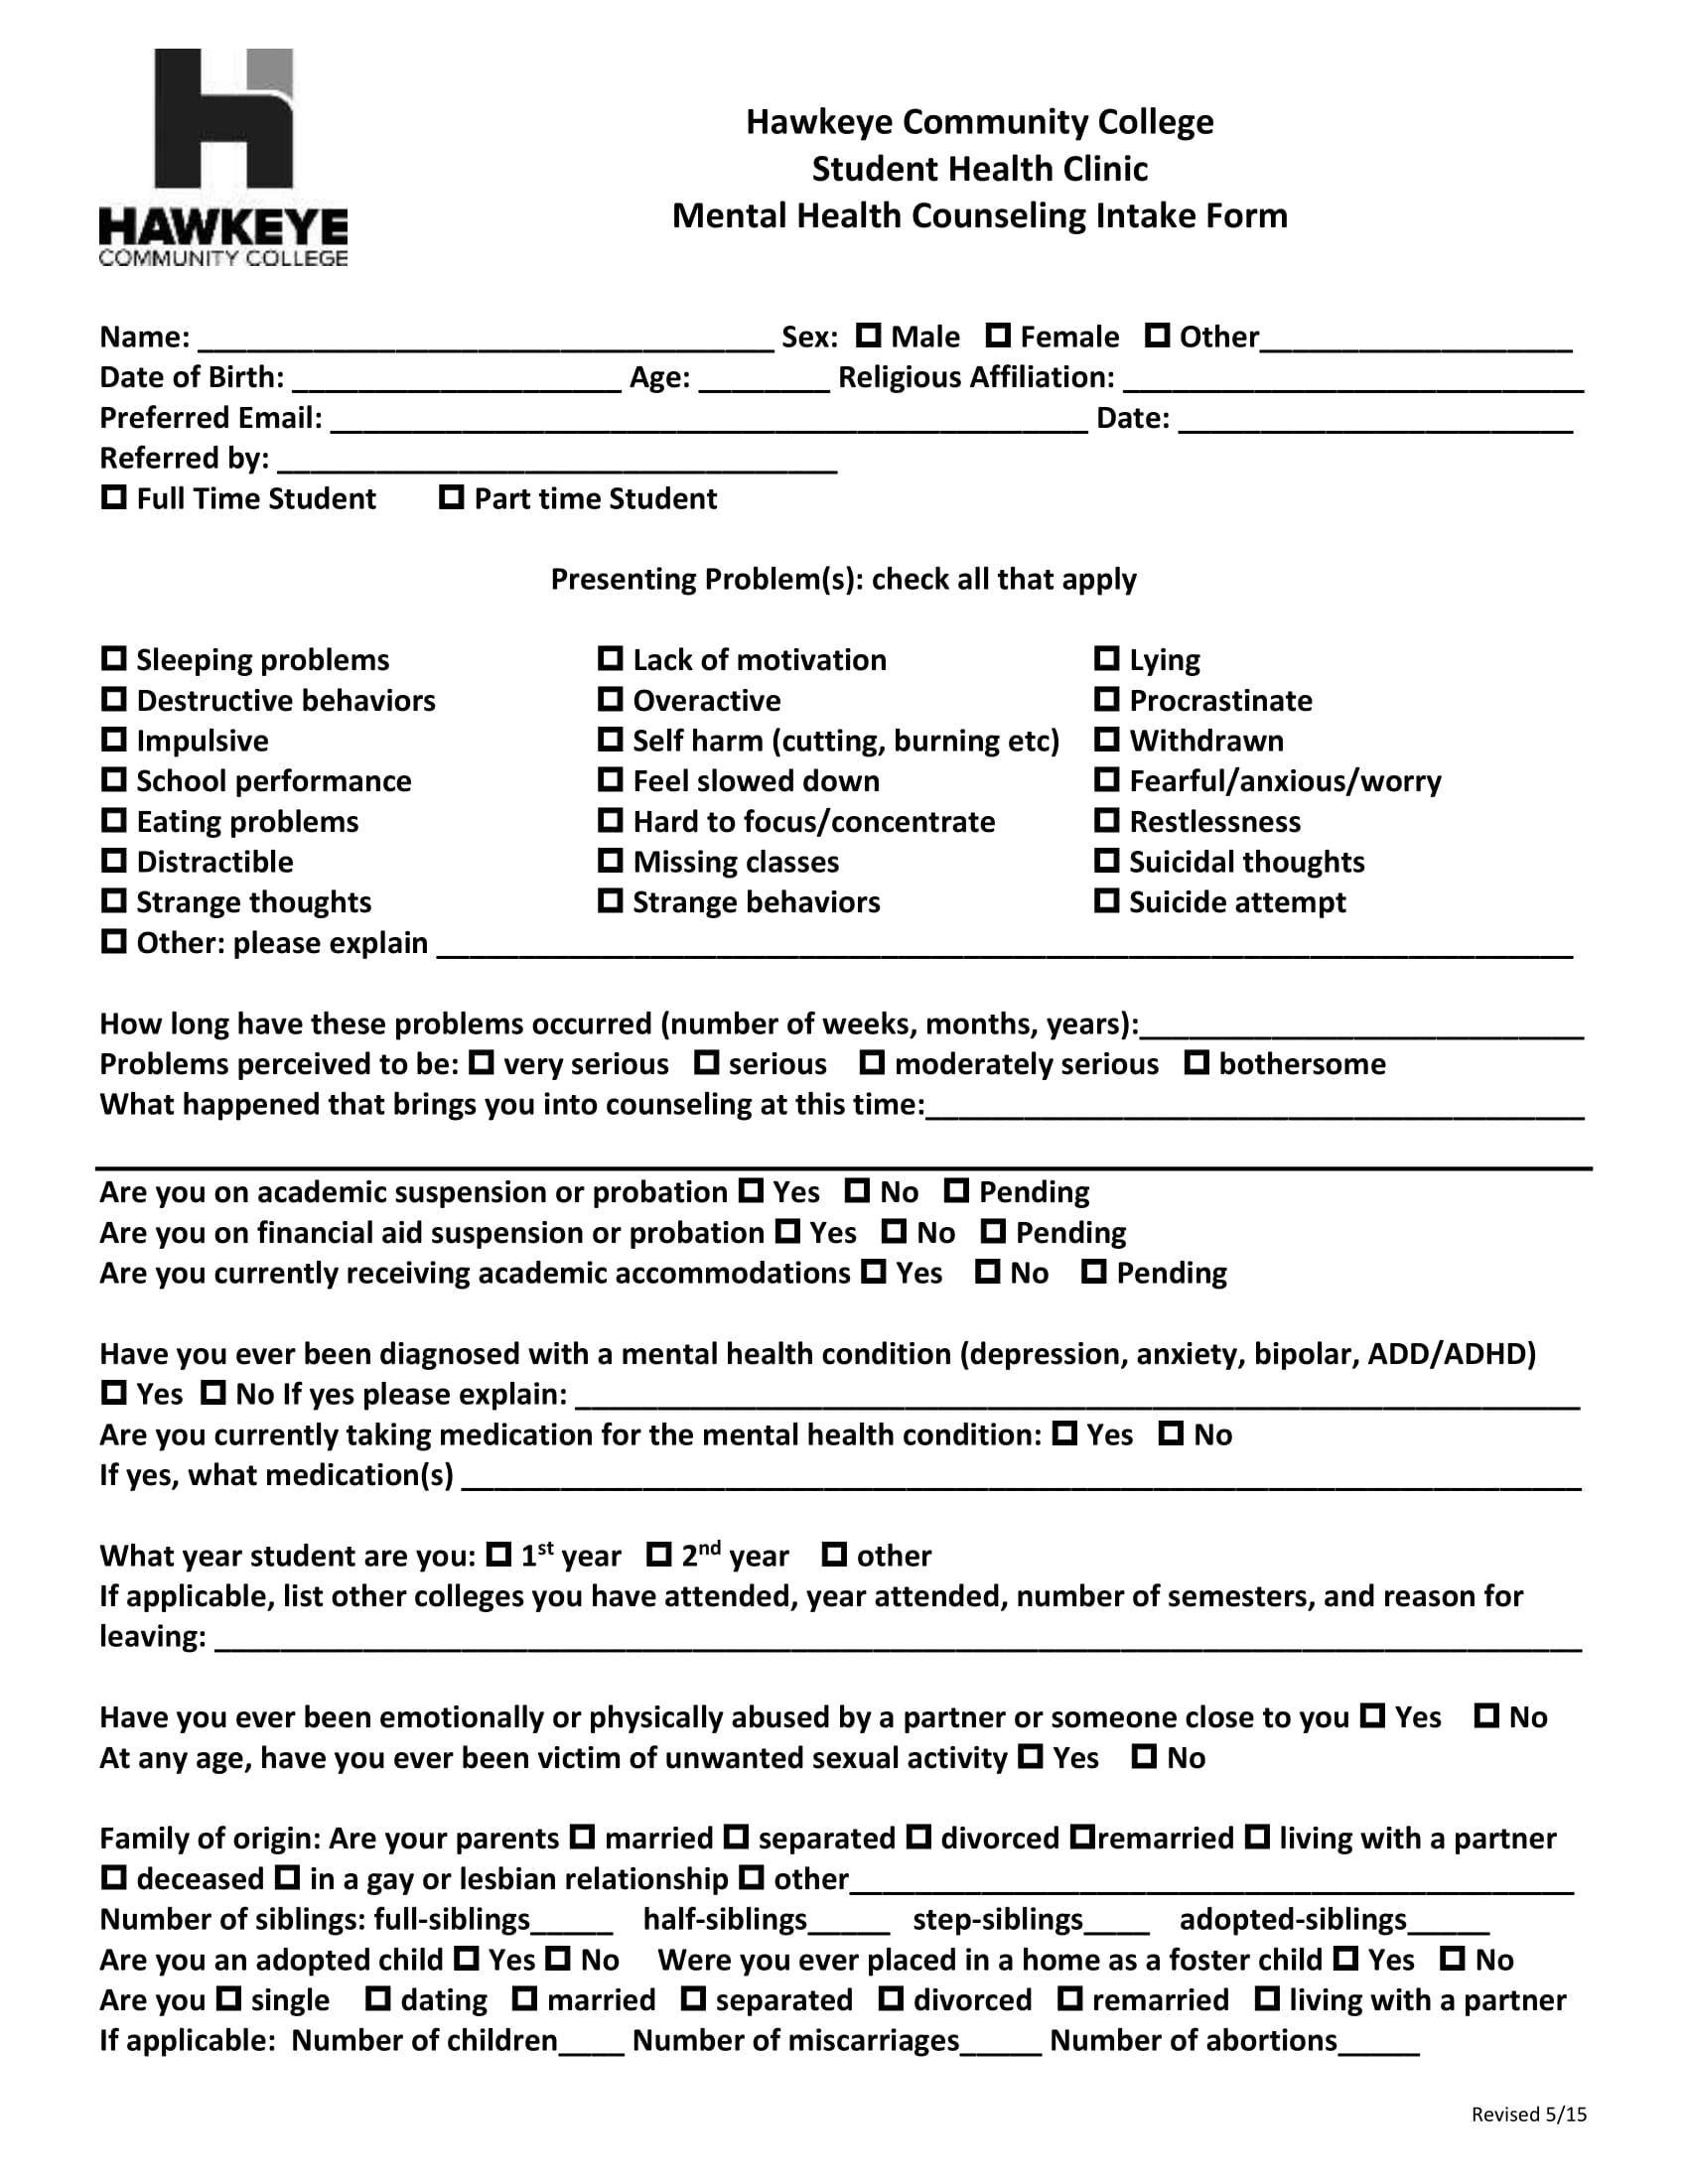 student mental health counseling intake form 1